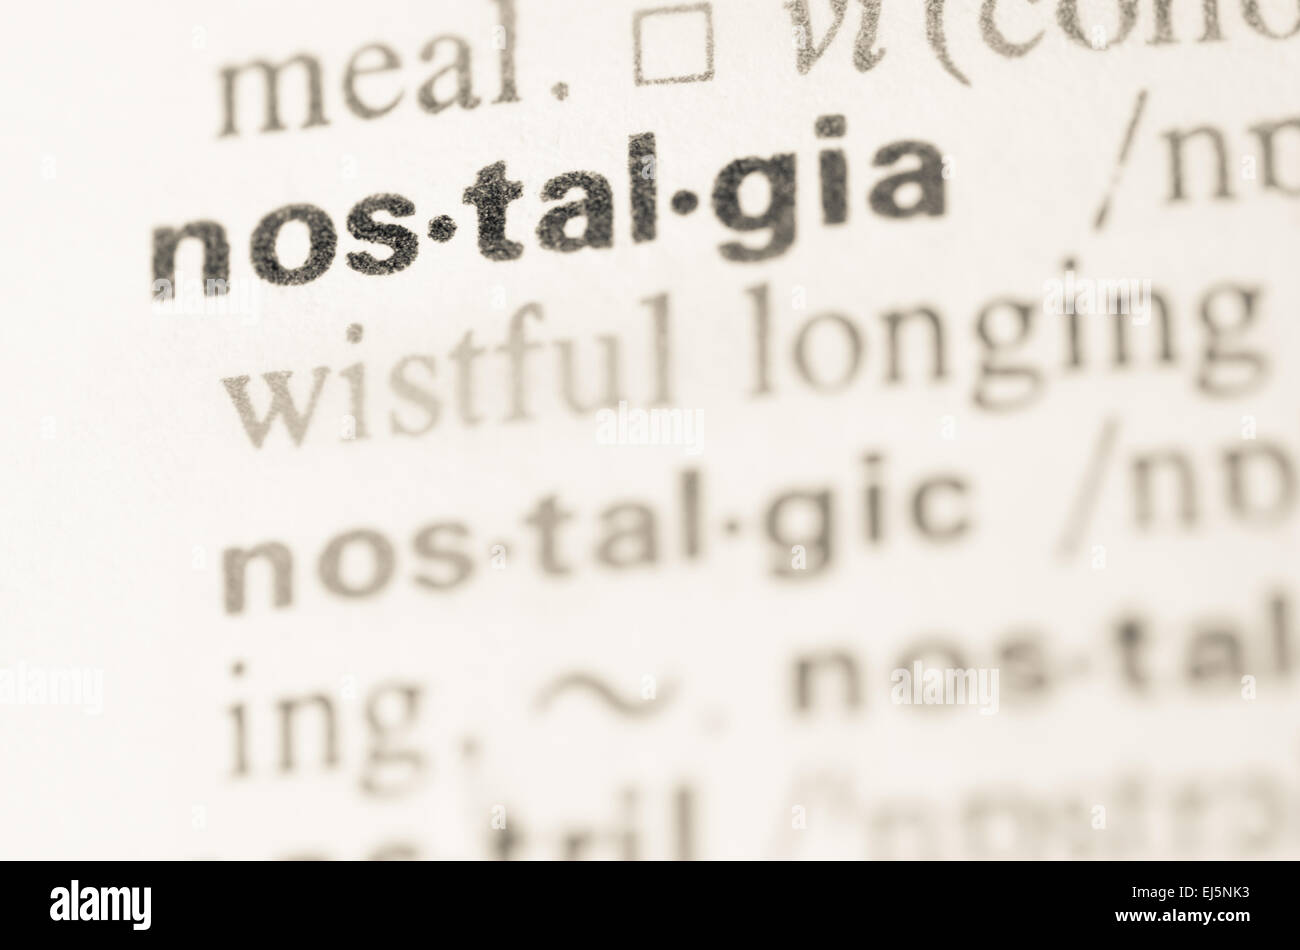 Definition of word nostalgia in dictionary Stock Photo